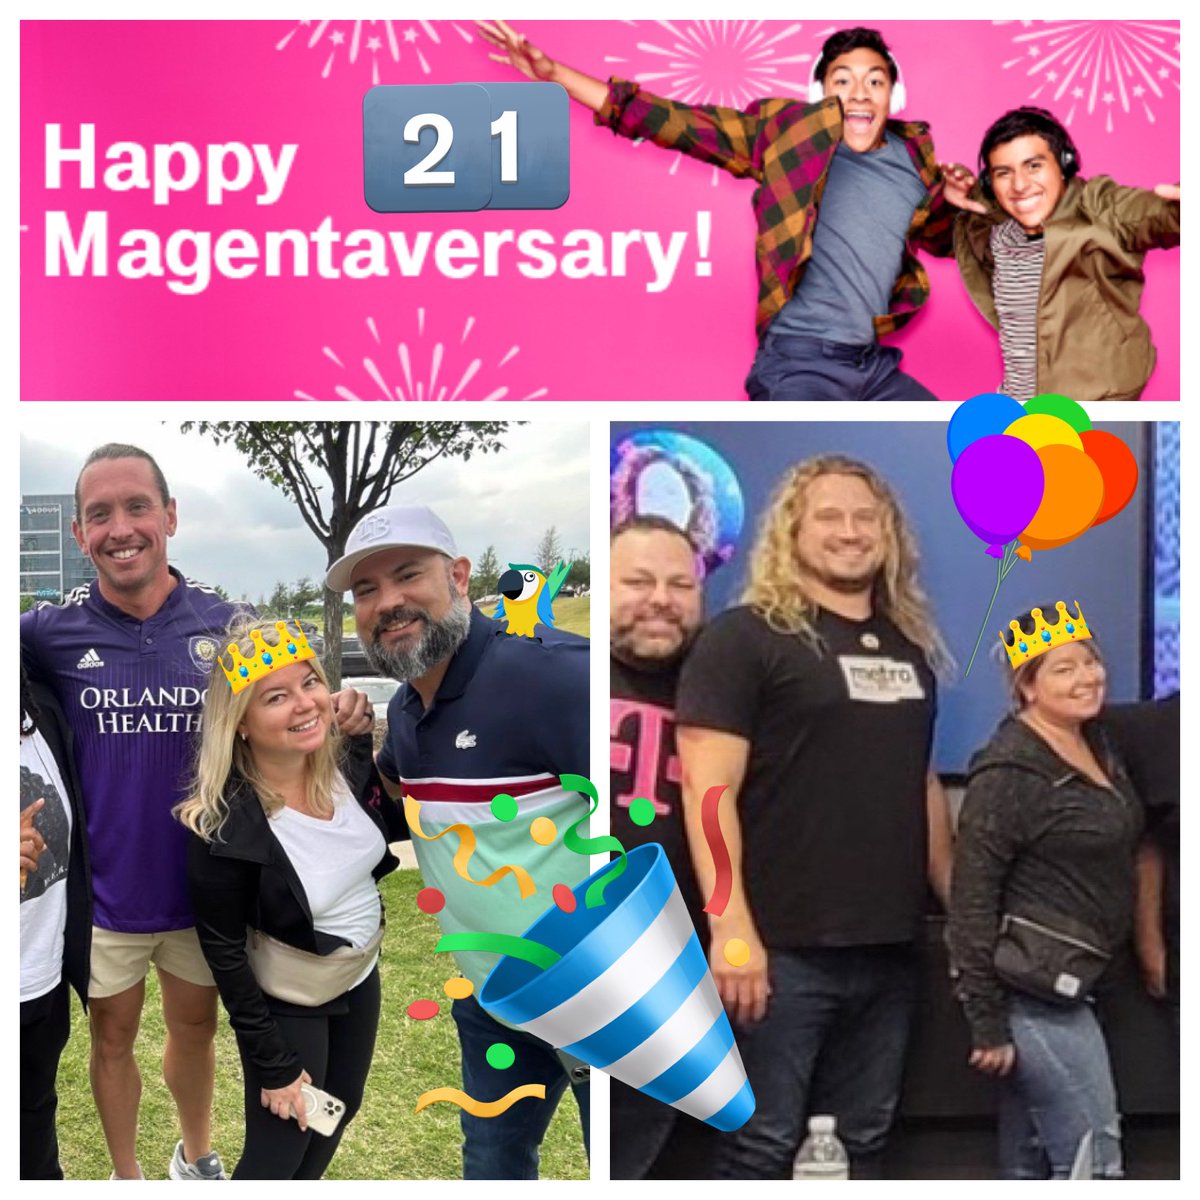 In 2003, In the Club, was top of the charts which is funny because that’s when @KatyaRaskin joined the @TMobile Club!!! Happy 21 and we appreciate all you do and have done! @thayesnet